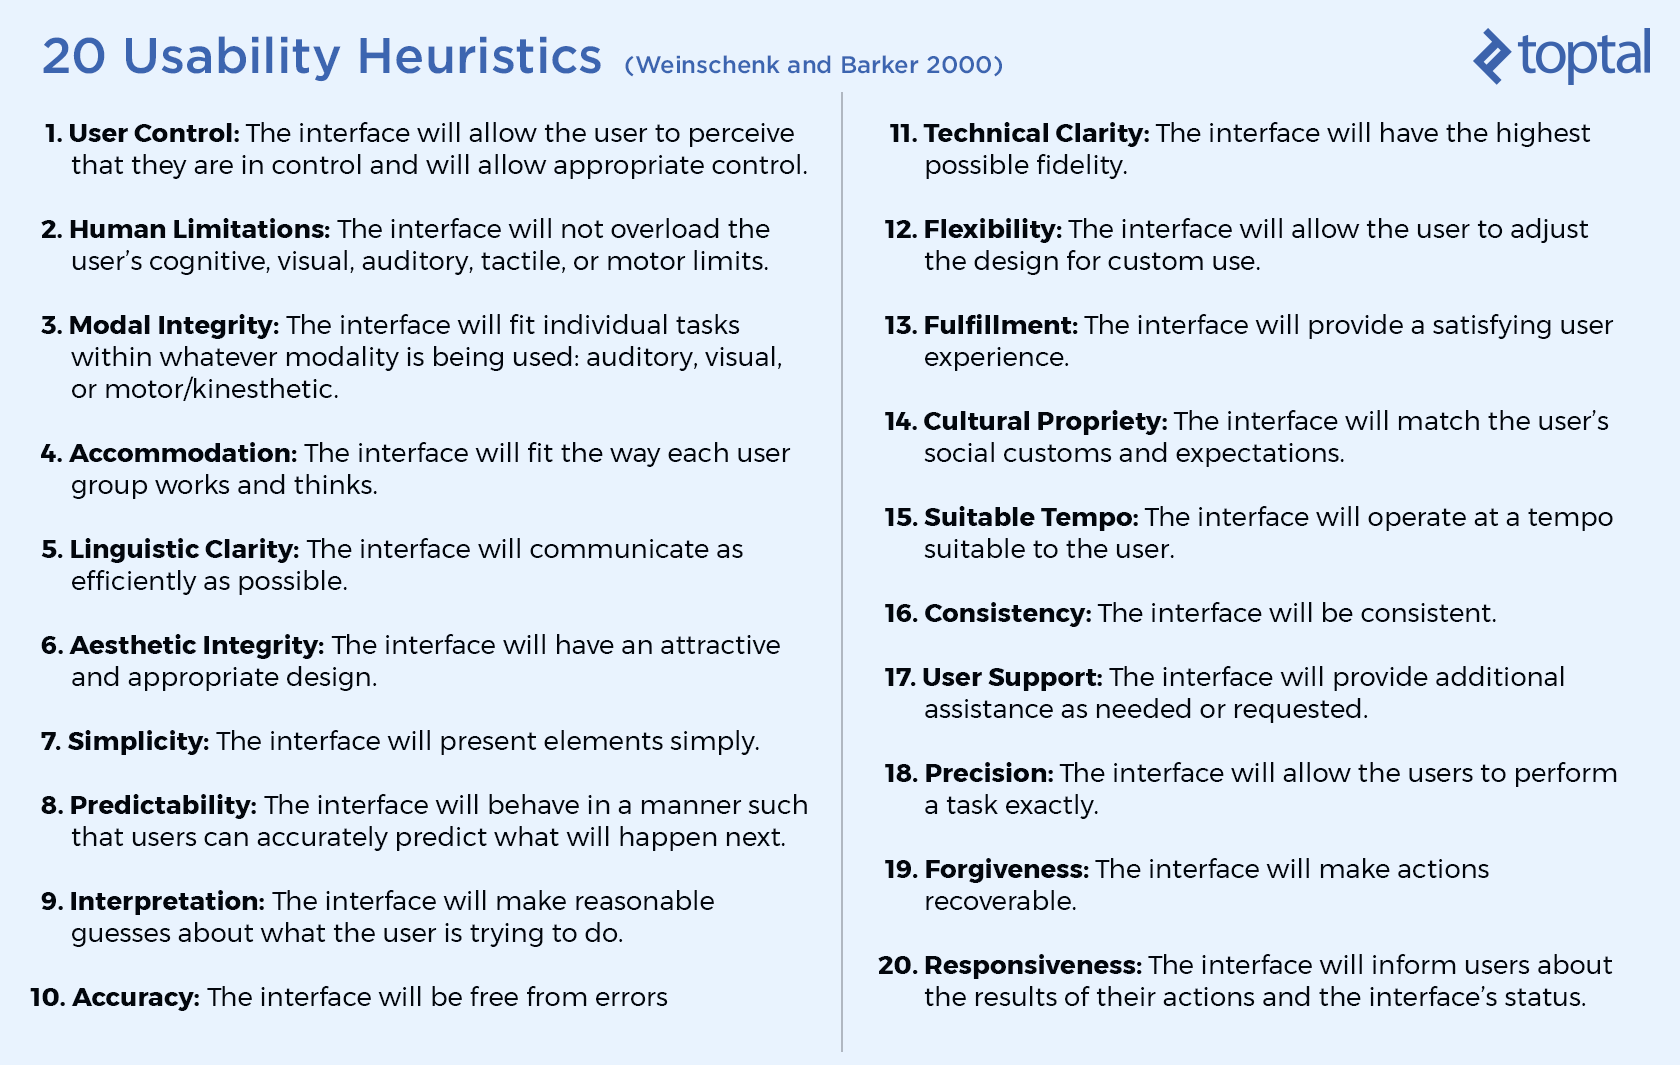 20 Usability Heuristics used during heuristic analysis to identify usability issues